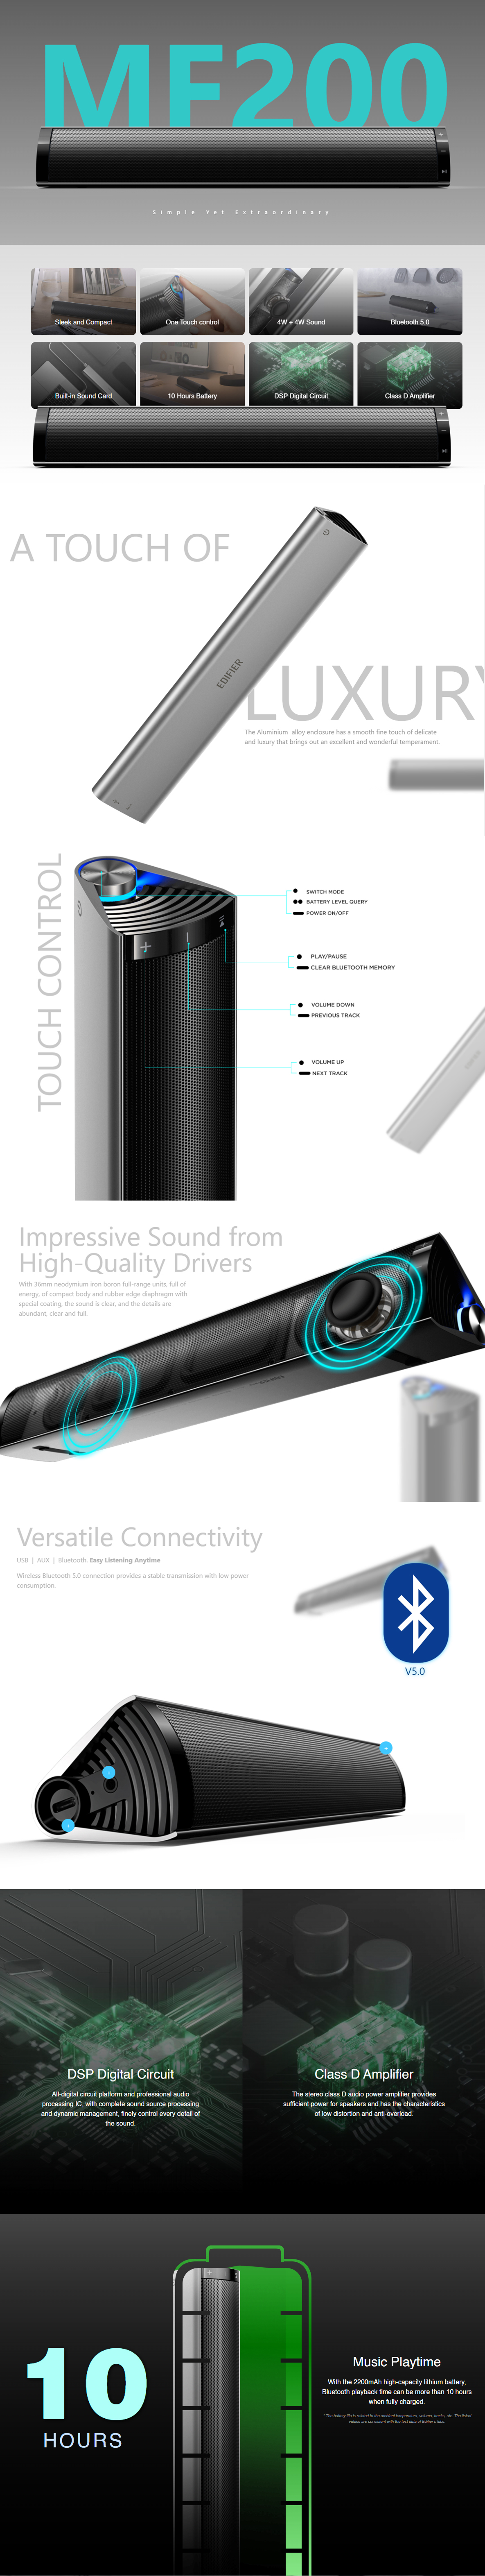 A large marketing image providing additional information about the product Edifier MF200 - Portable Bluetooth Speaker (Silver) - Additional alt info not provided